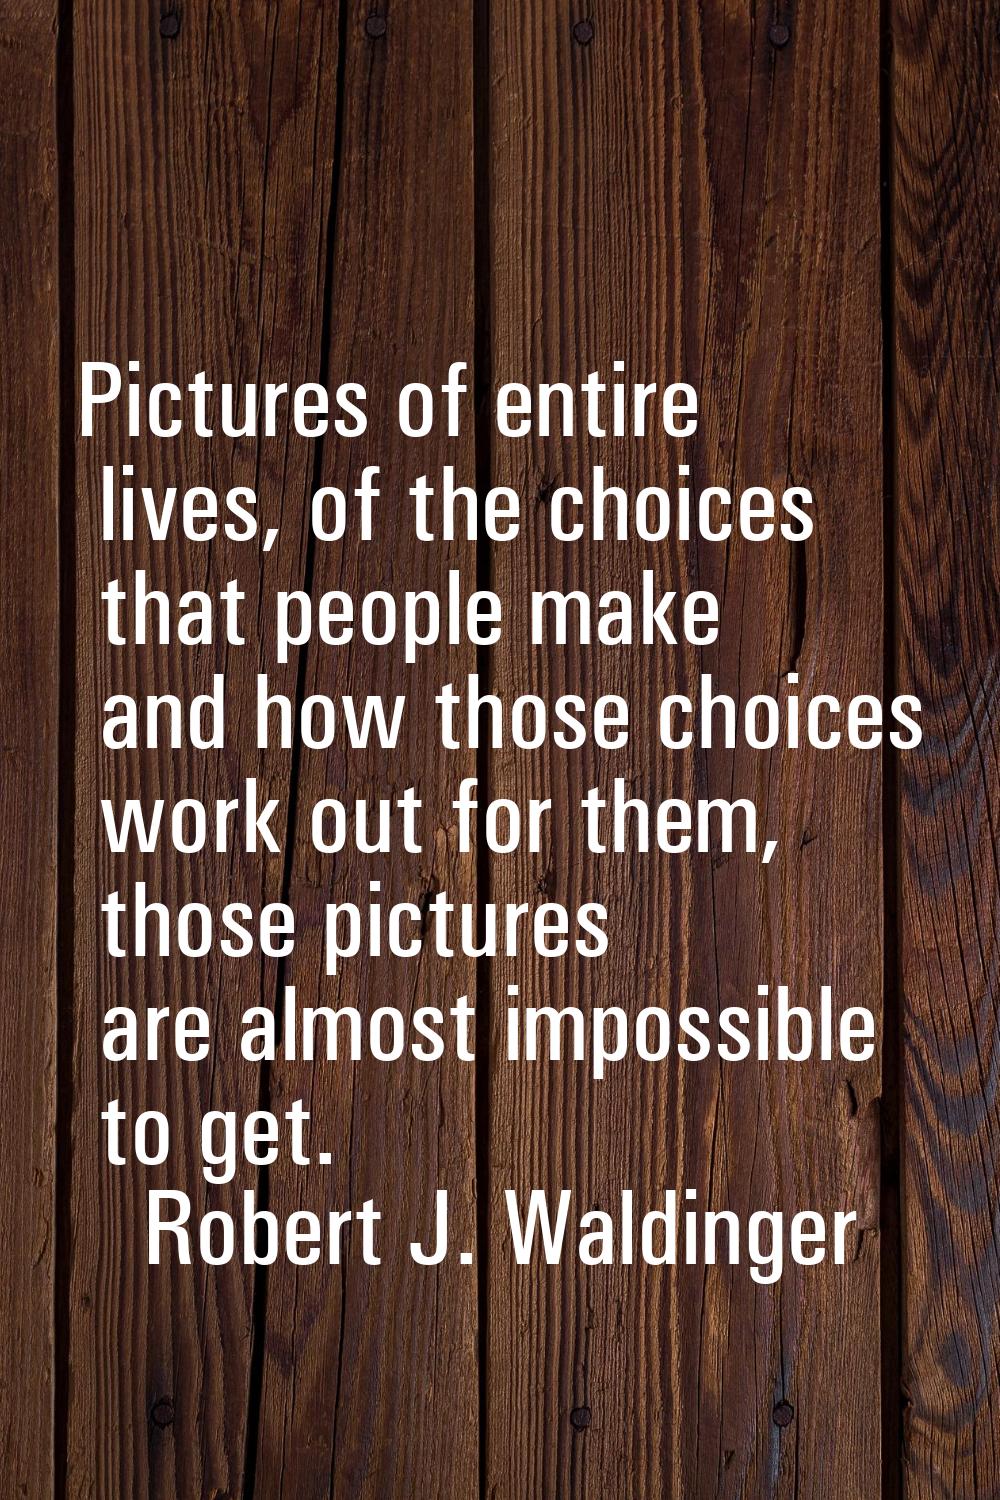 Pictures of entire lives, of the choices that people make and how those choices work out for them, 